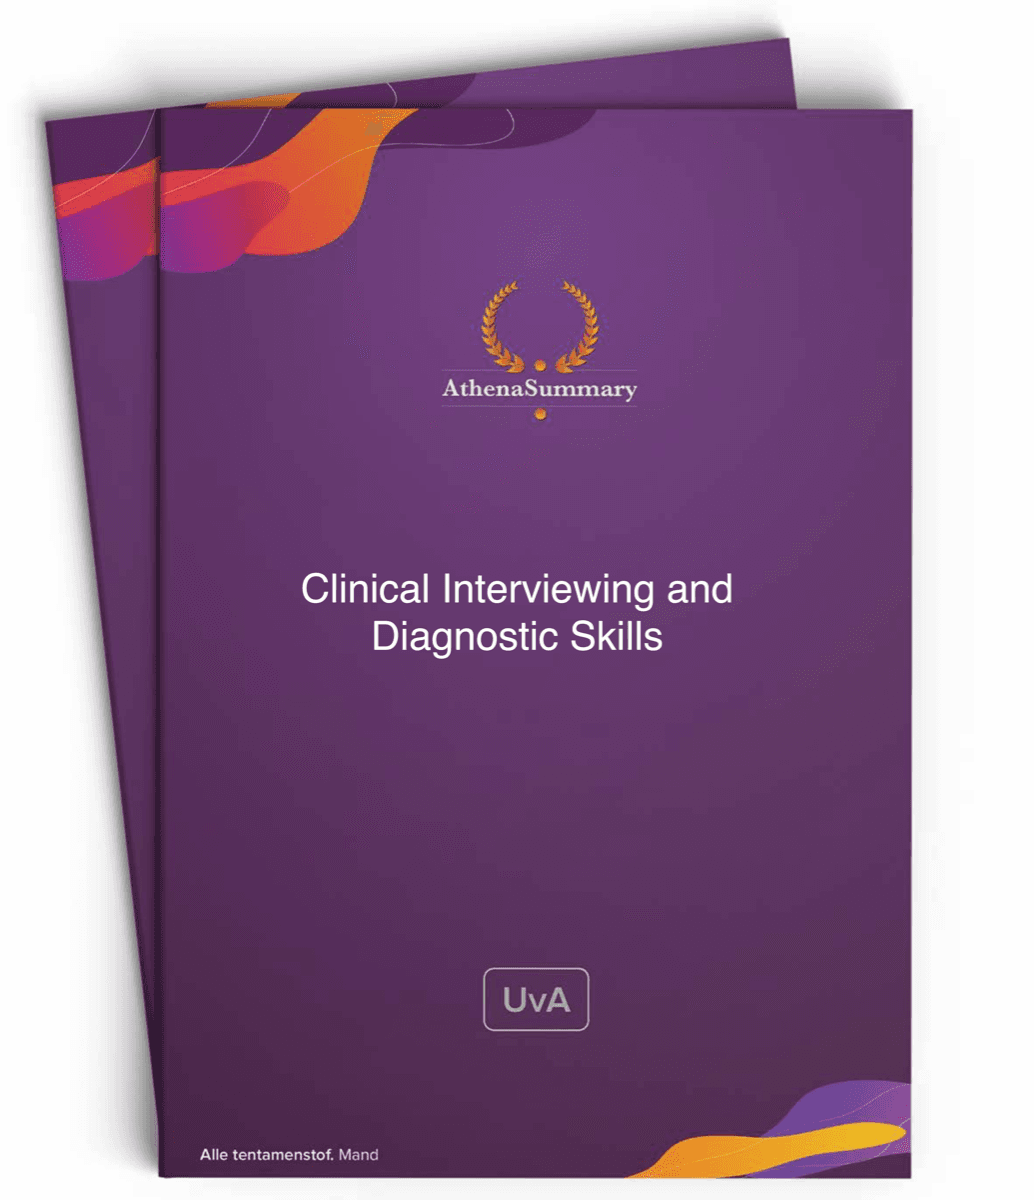 Literature Summary: Clinical Interviewing and Diagnostic Skills